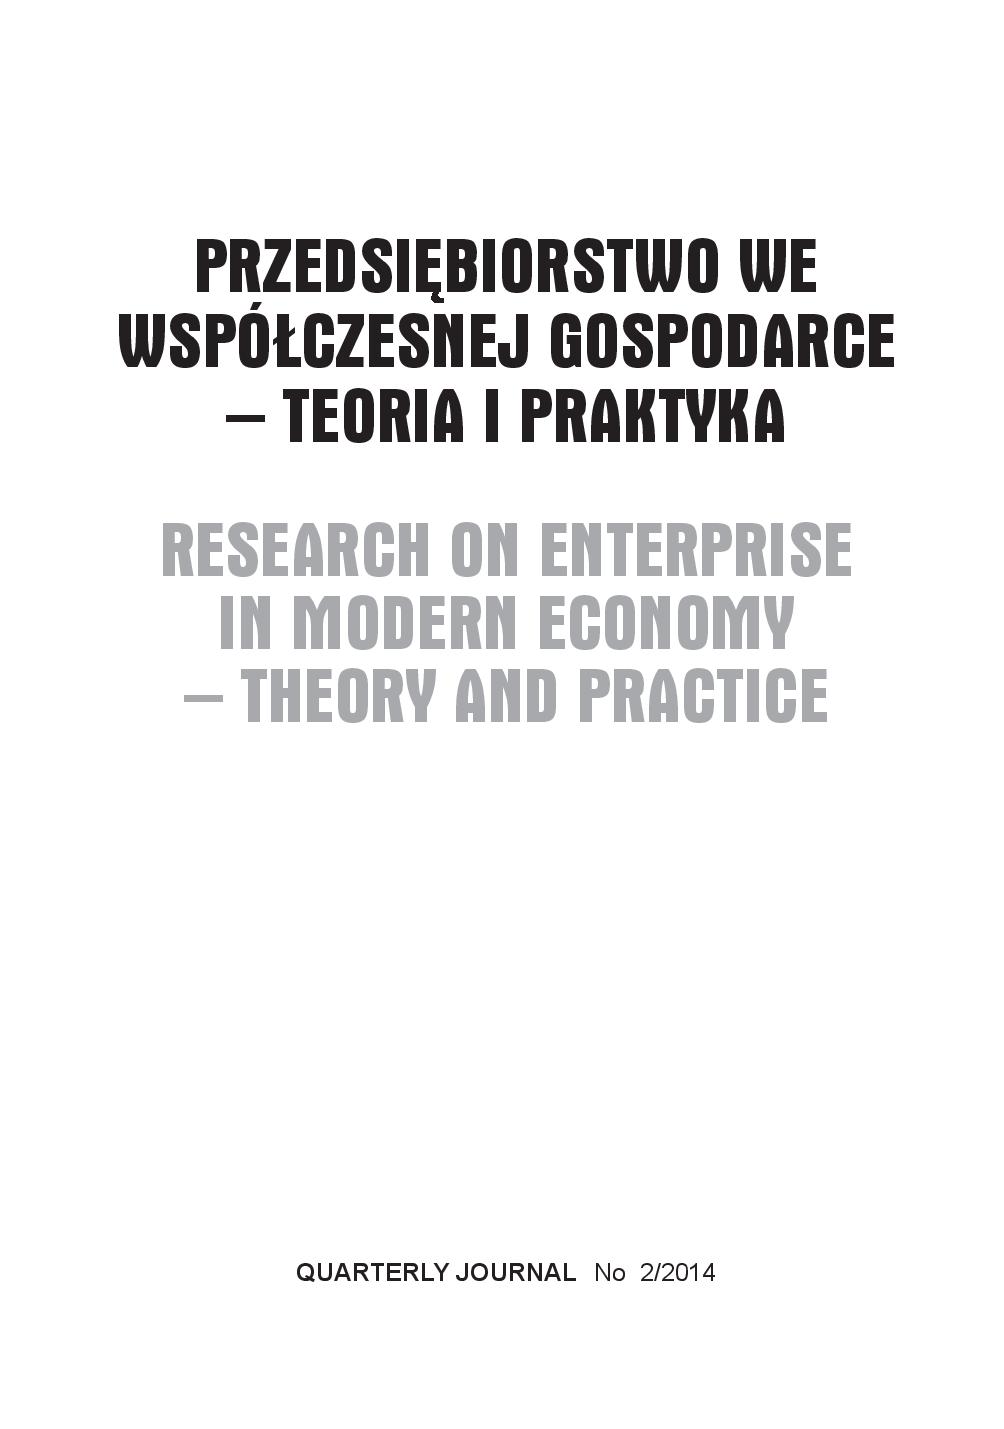 Selected activities supporting cooperation between scientists and enterprises as an example of strengthen of science-business connections in Masovia Cover Image